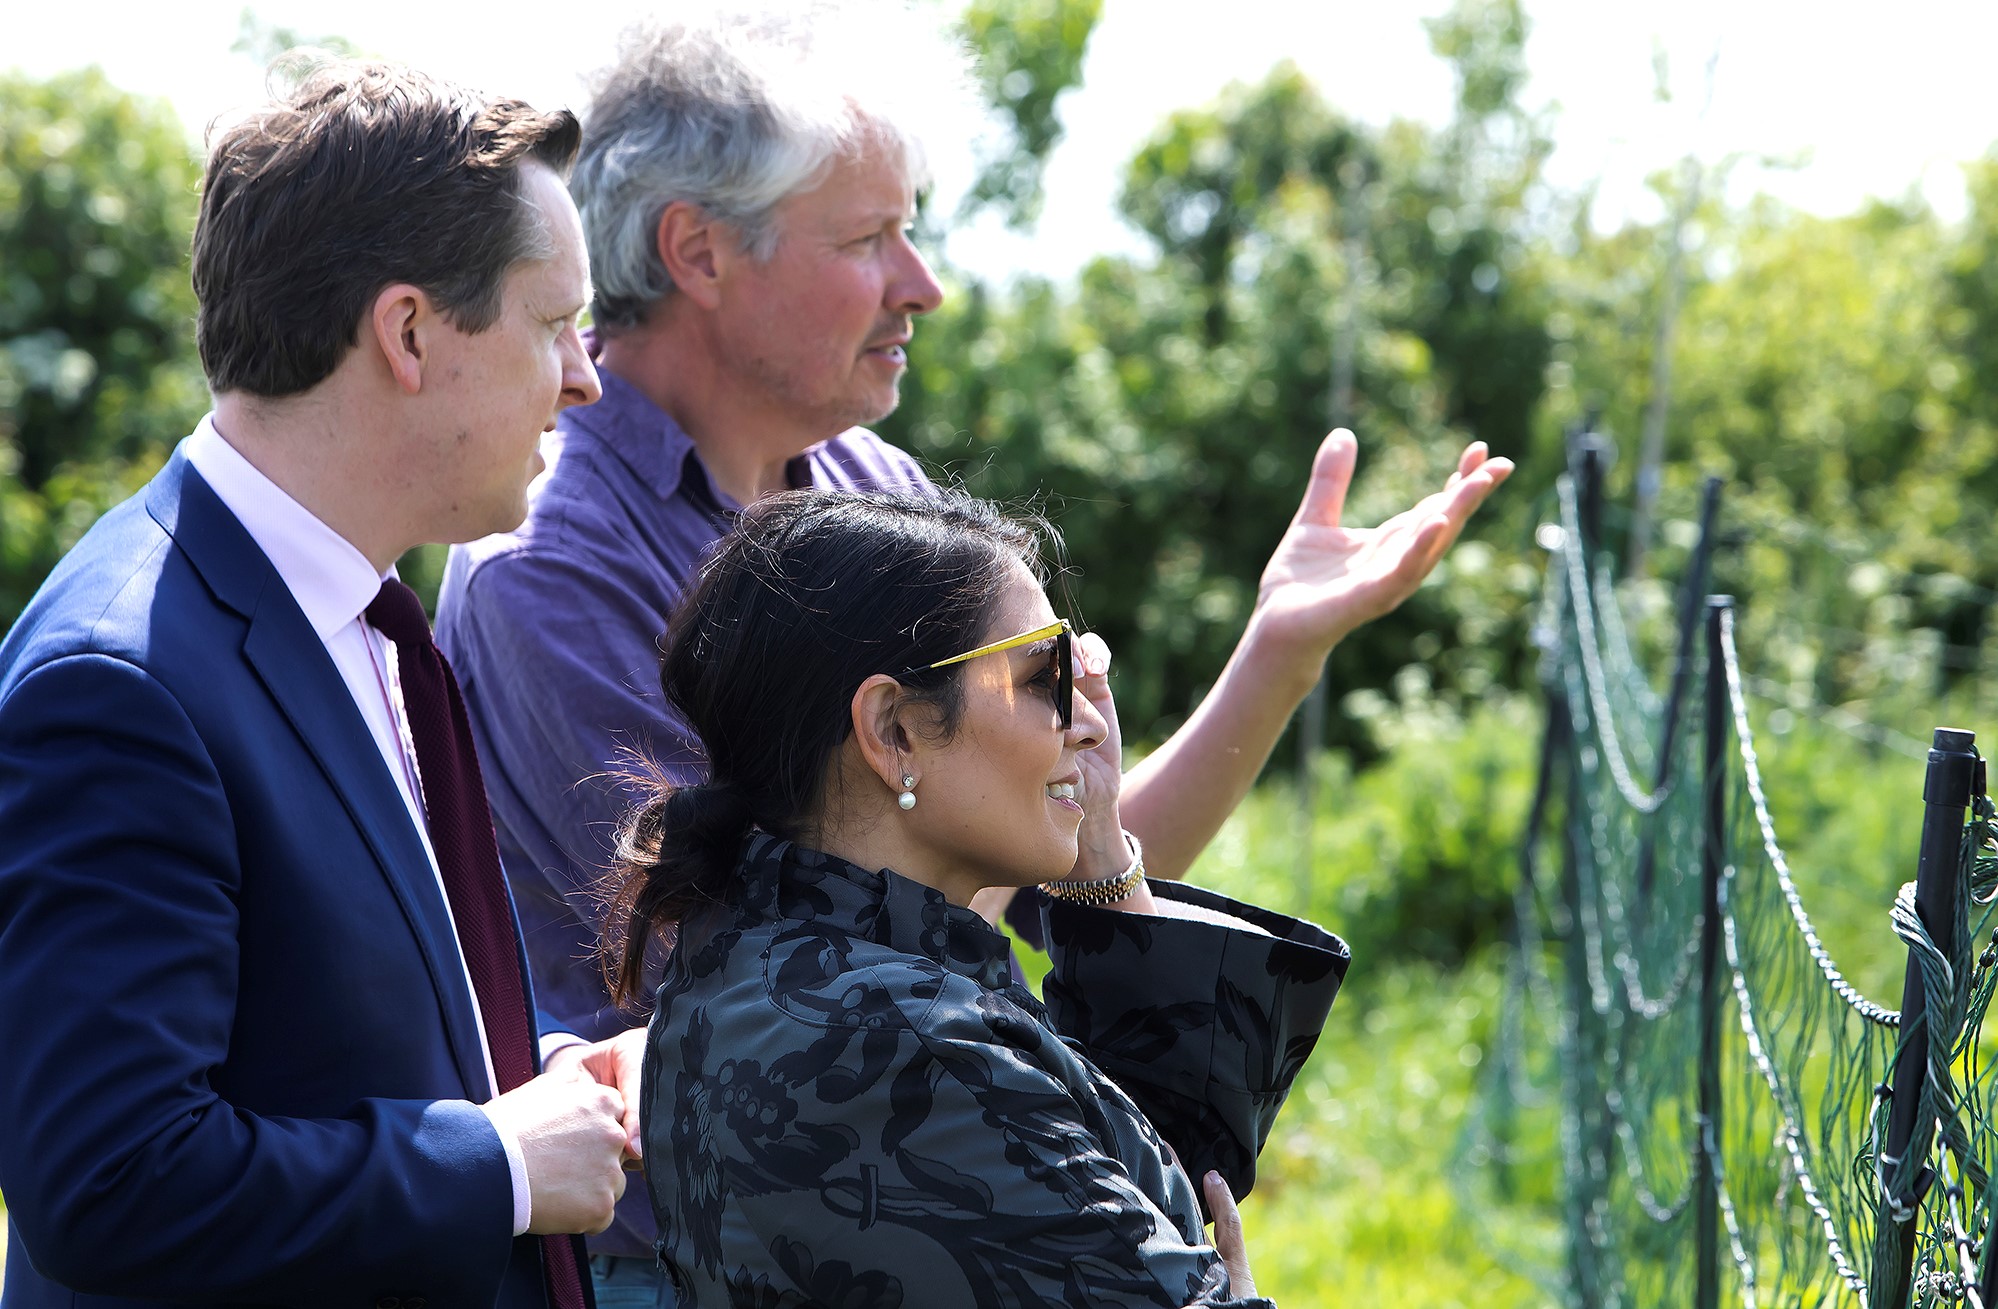 Spencer Christy, Director at Lauriston Farm, talks with the Minister and Priti during their visit